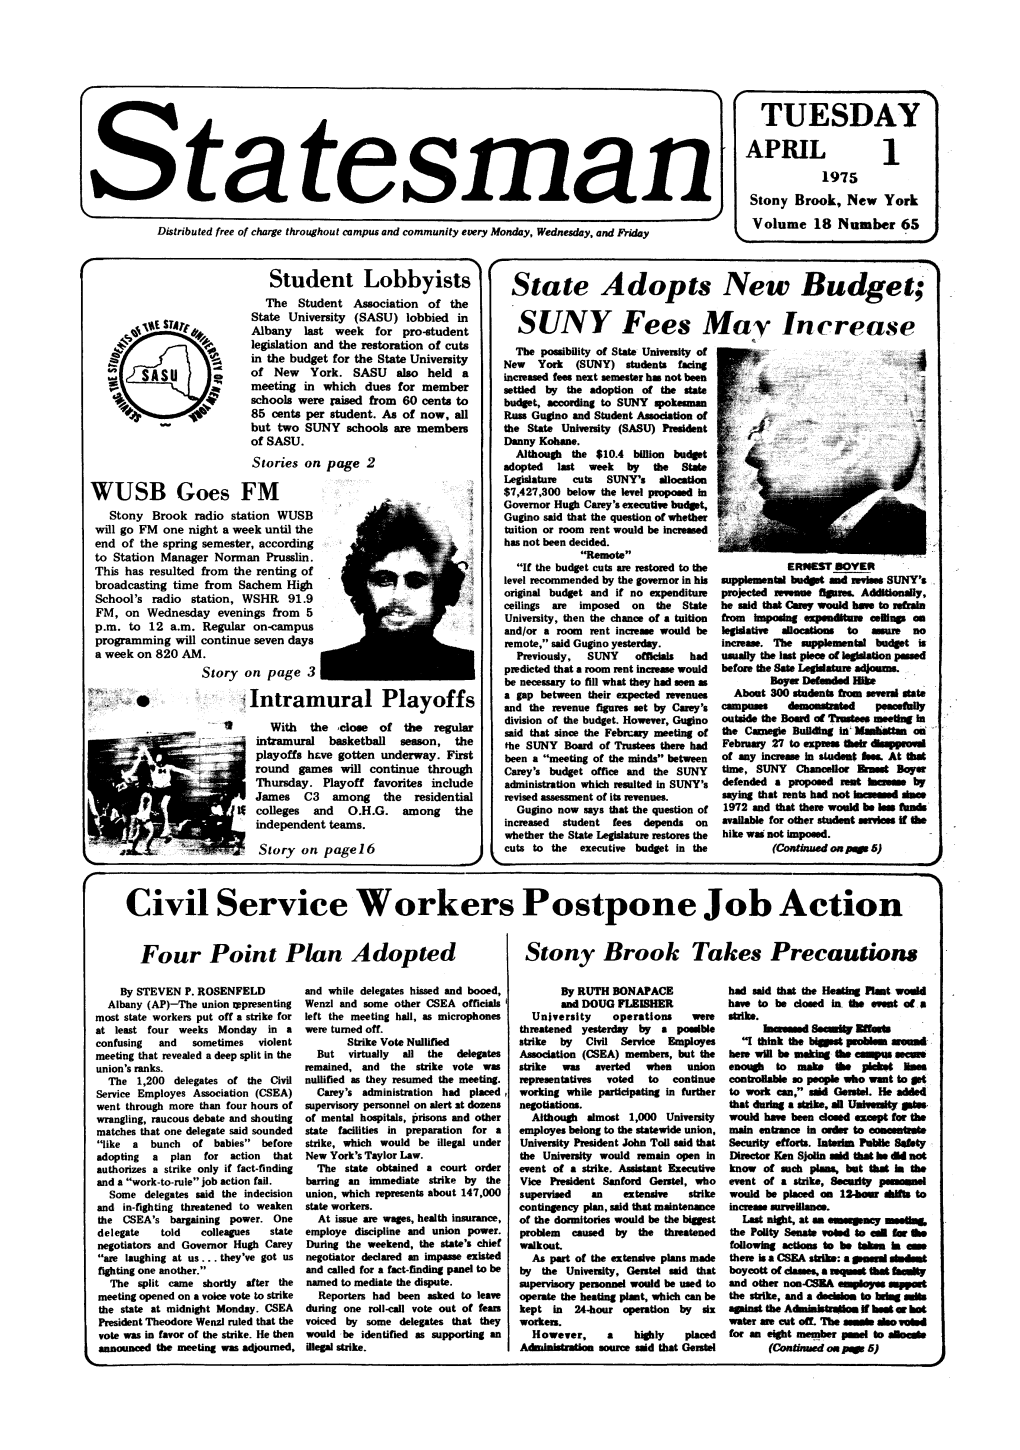 Statesman Stony Brook, New York Volume 18 Number 65 Distributed Free of Charge Throughout Campus and Community Every Monday, Wednesday, and Fridy